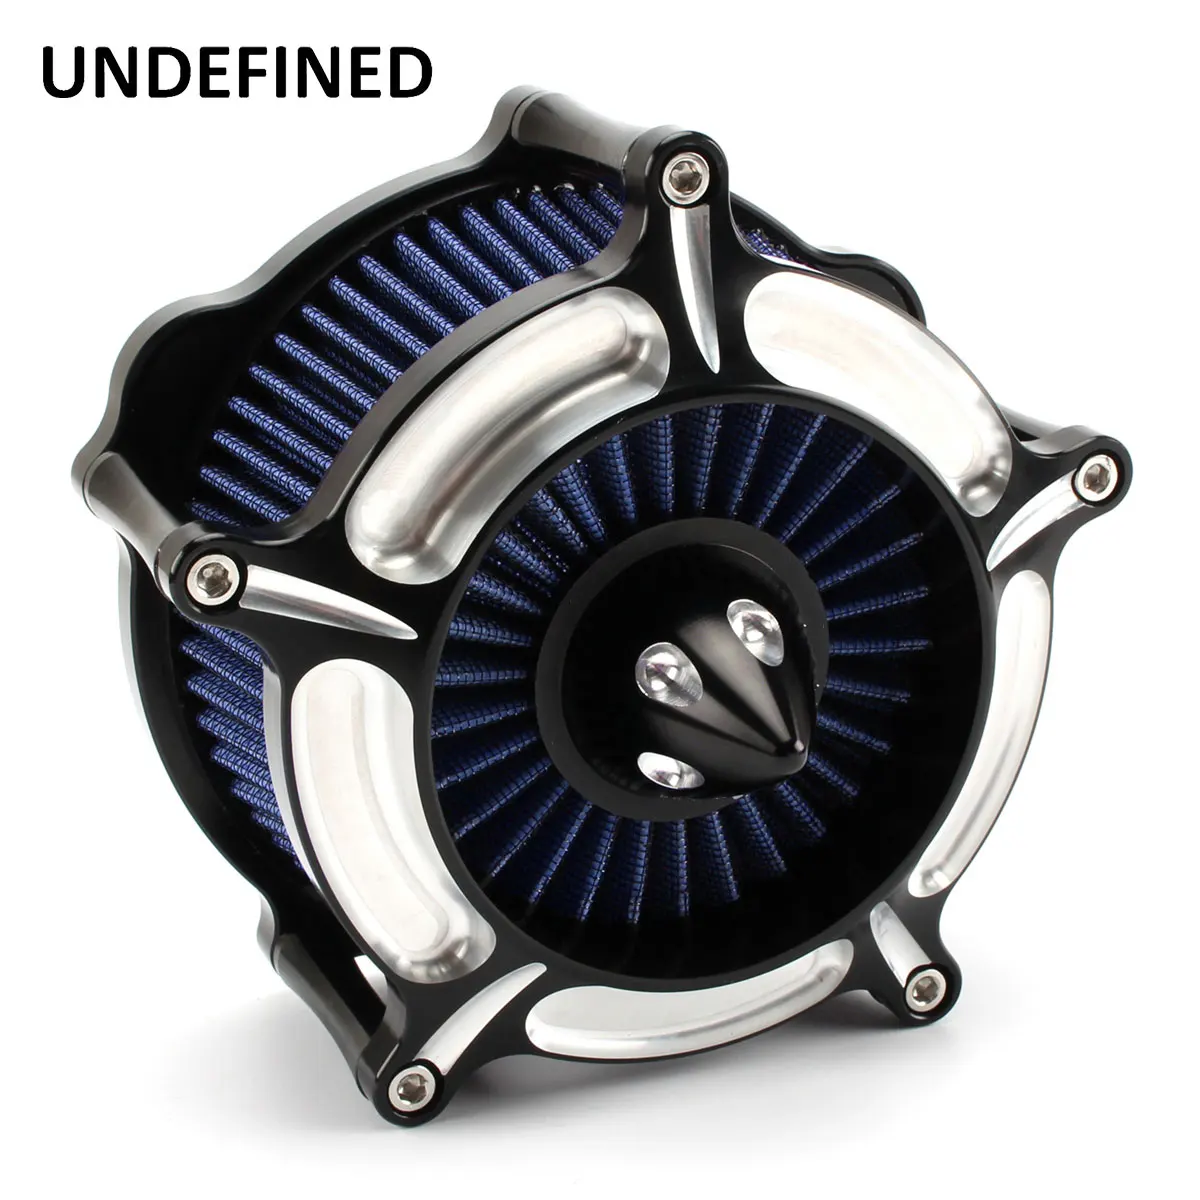 

Air Filter CNC Air Cleaner Intake Blue Filter For Harley Sportster XL883 XL1200 Iron 883 48 72 Seventy-Two Forty-Eight 1991-2021